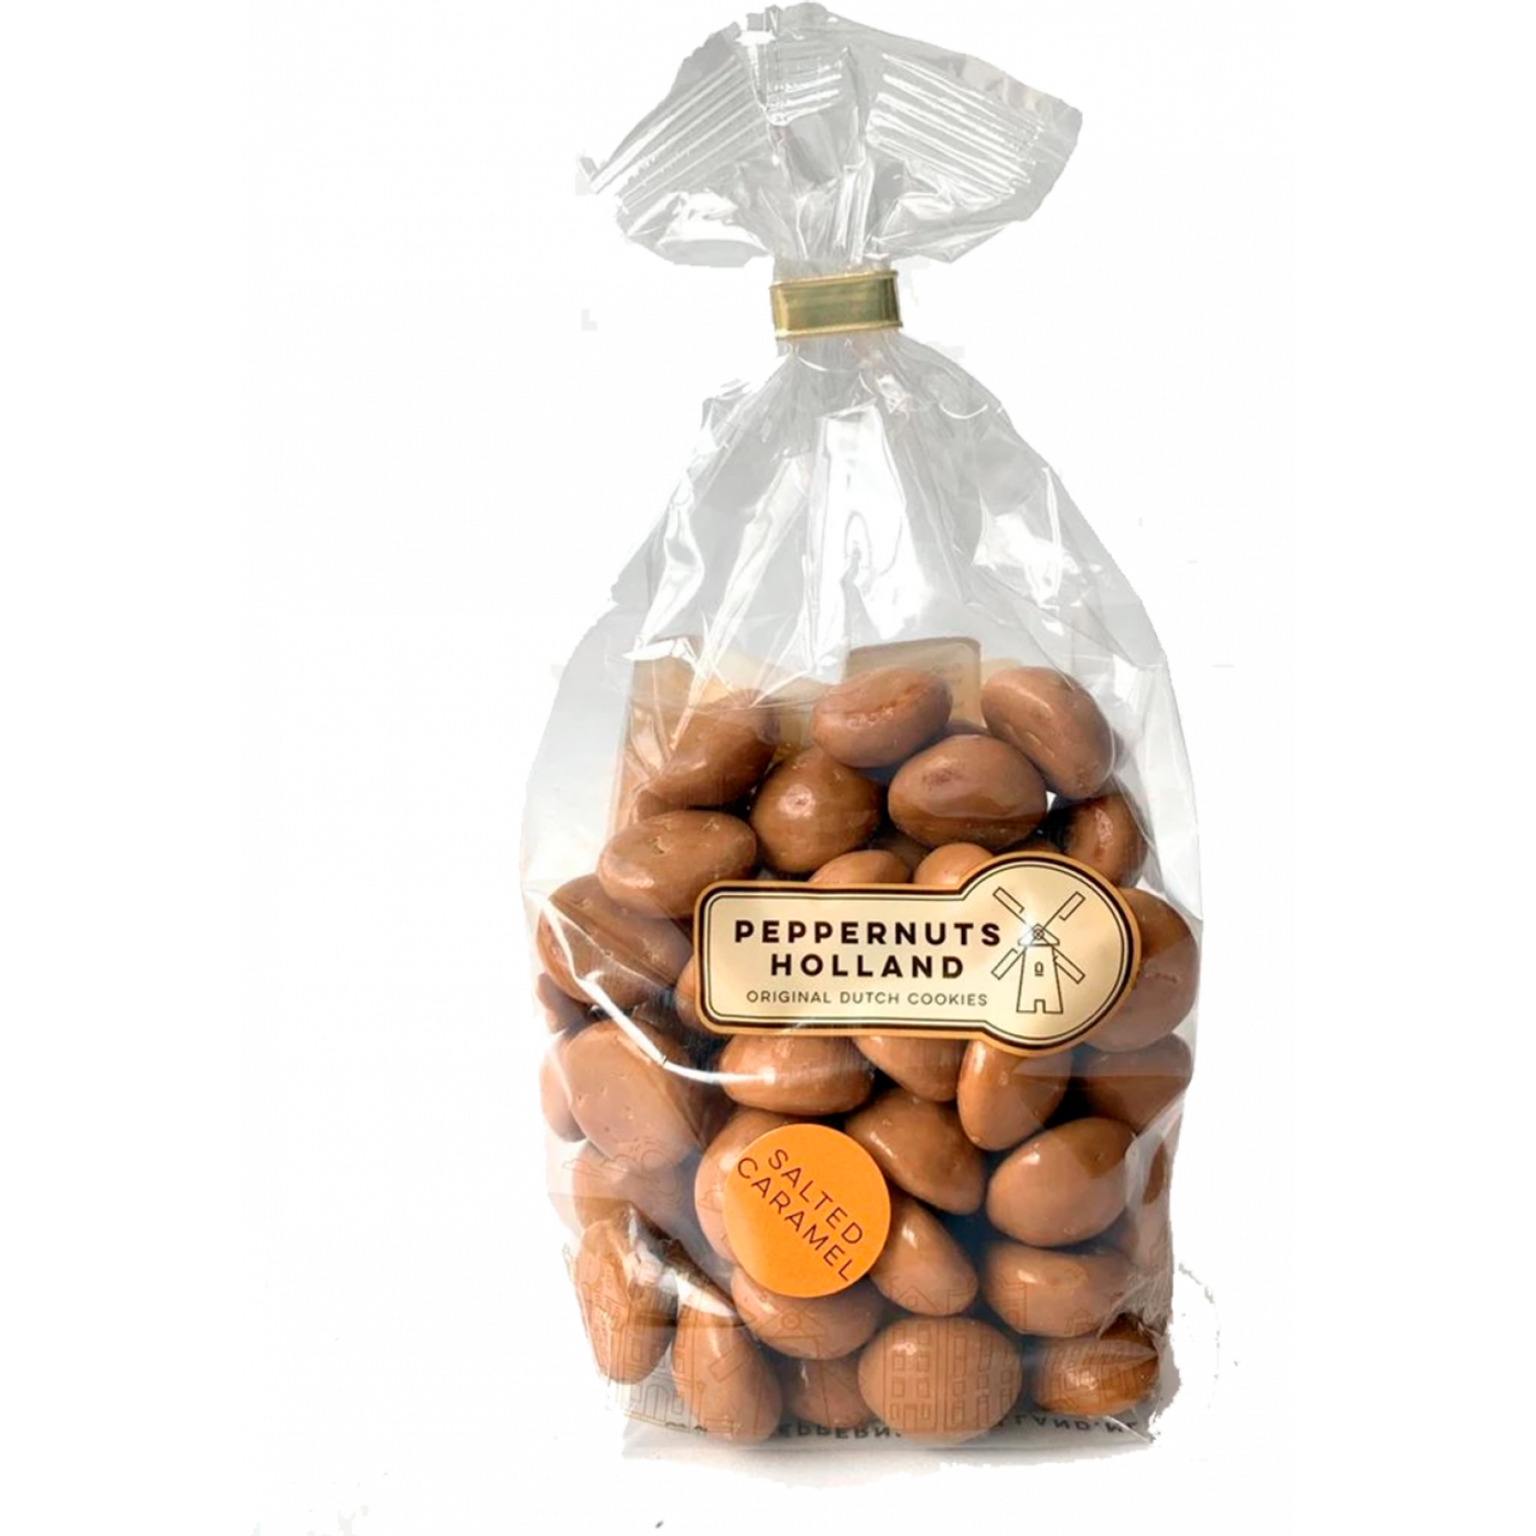 Peppernuts in various flavours